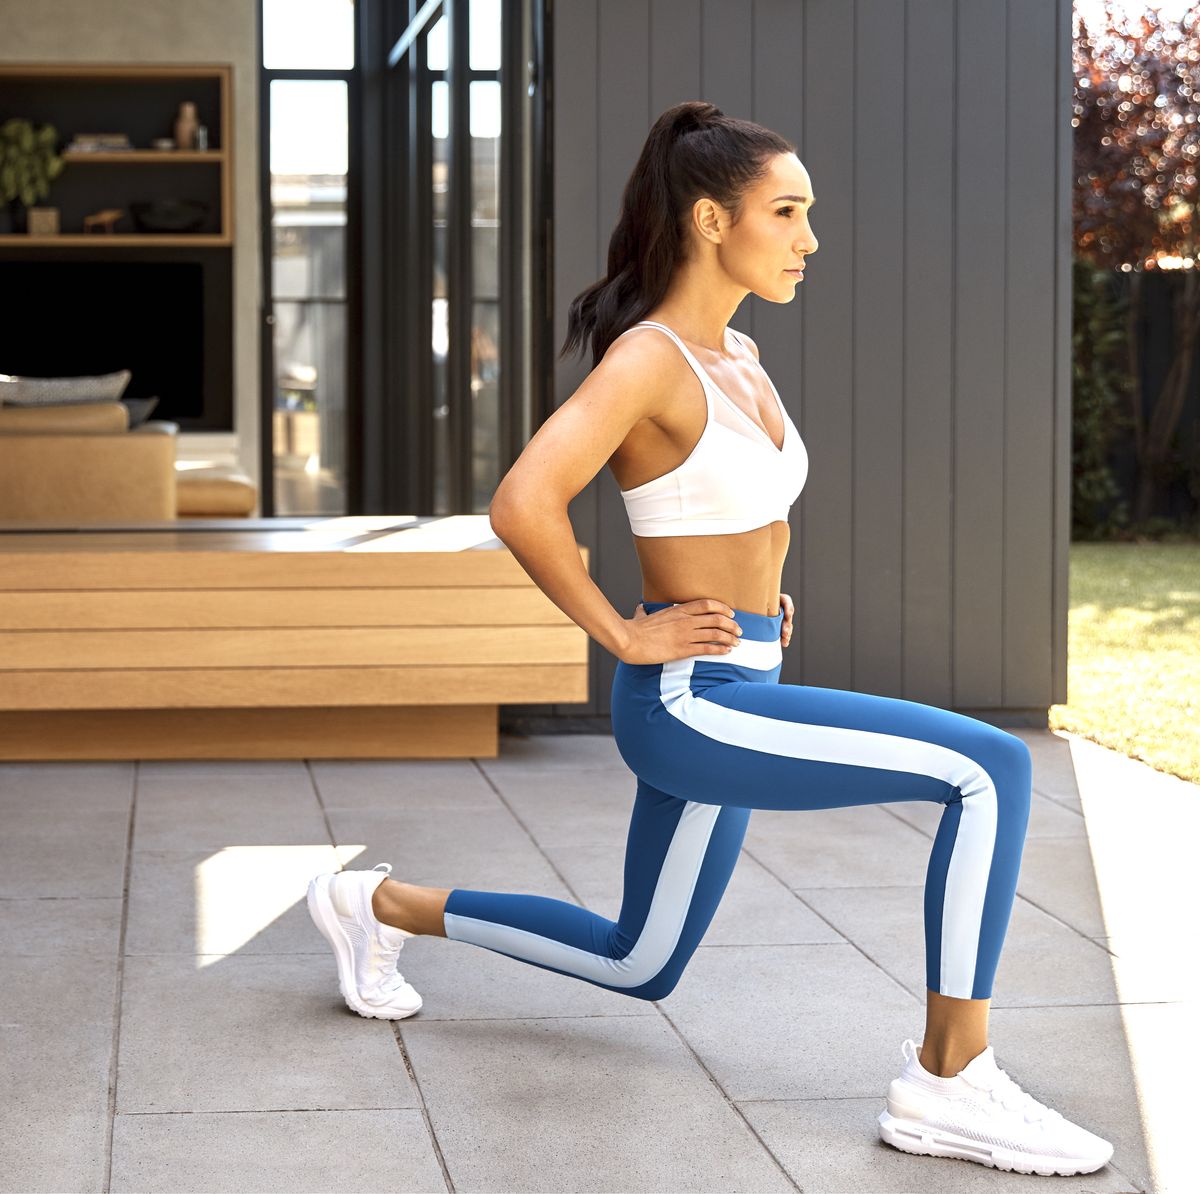 Hover Leg Extension - Sweat